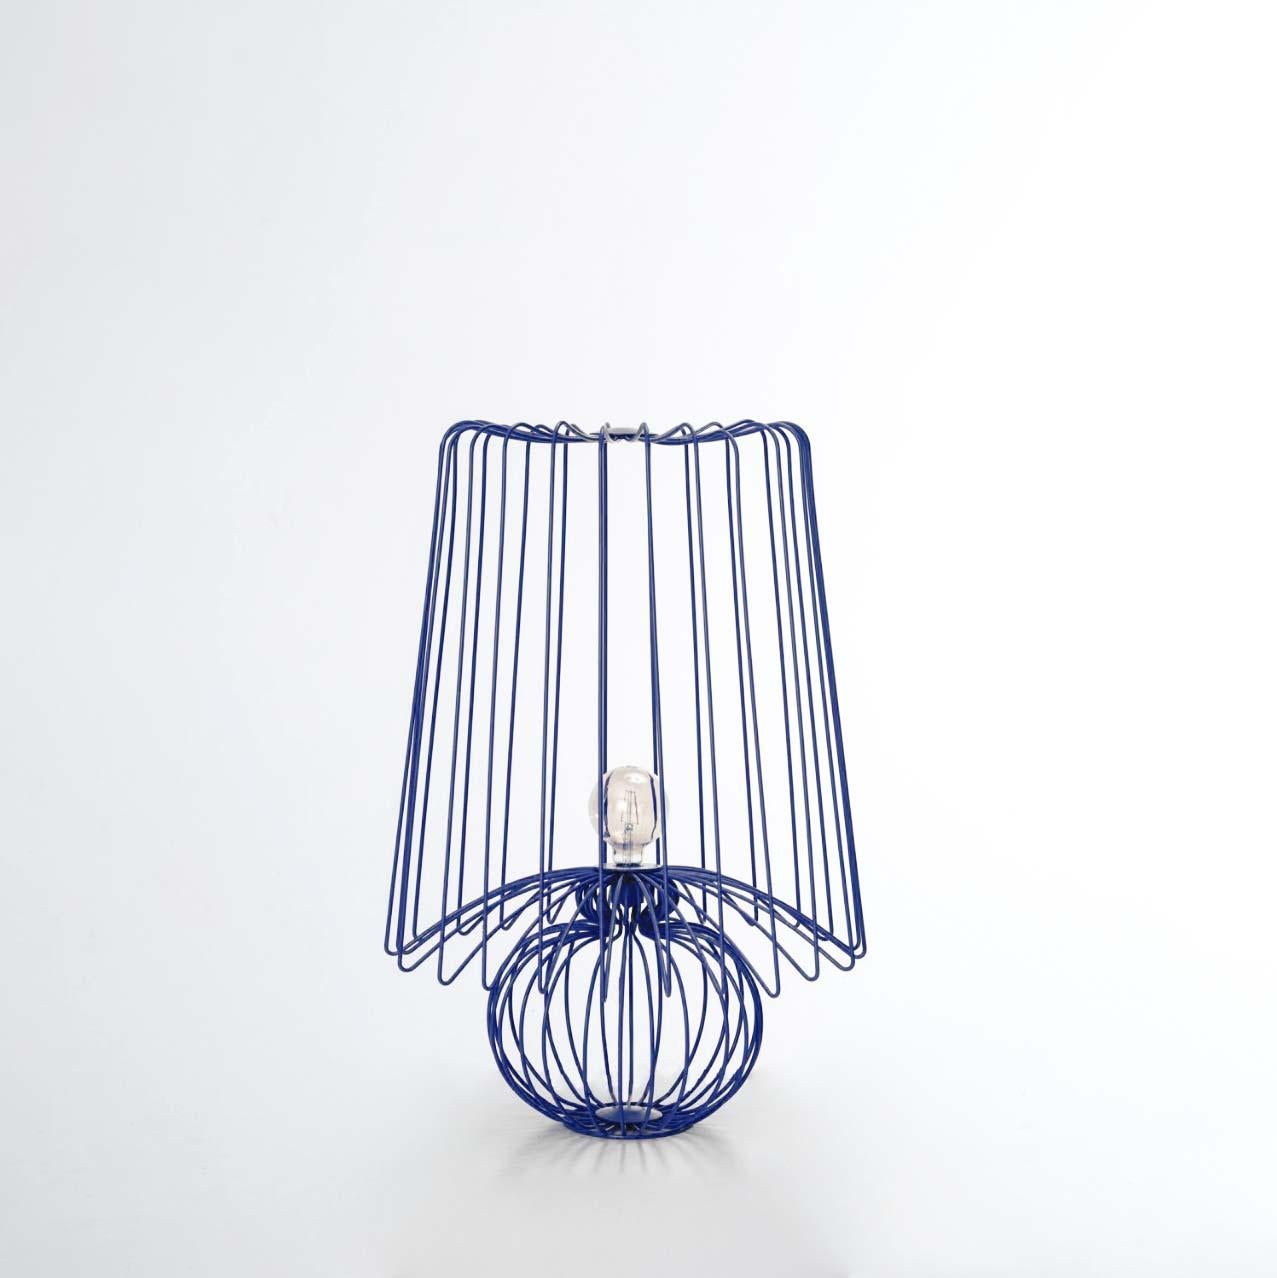 Achieving perfect harmony between light and transparency, this handmade wired piece can be used either for lighting or as a contemporary decorative item and statement lamp. With its distinctive design derived from rounded wire shapes and an imposing